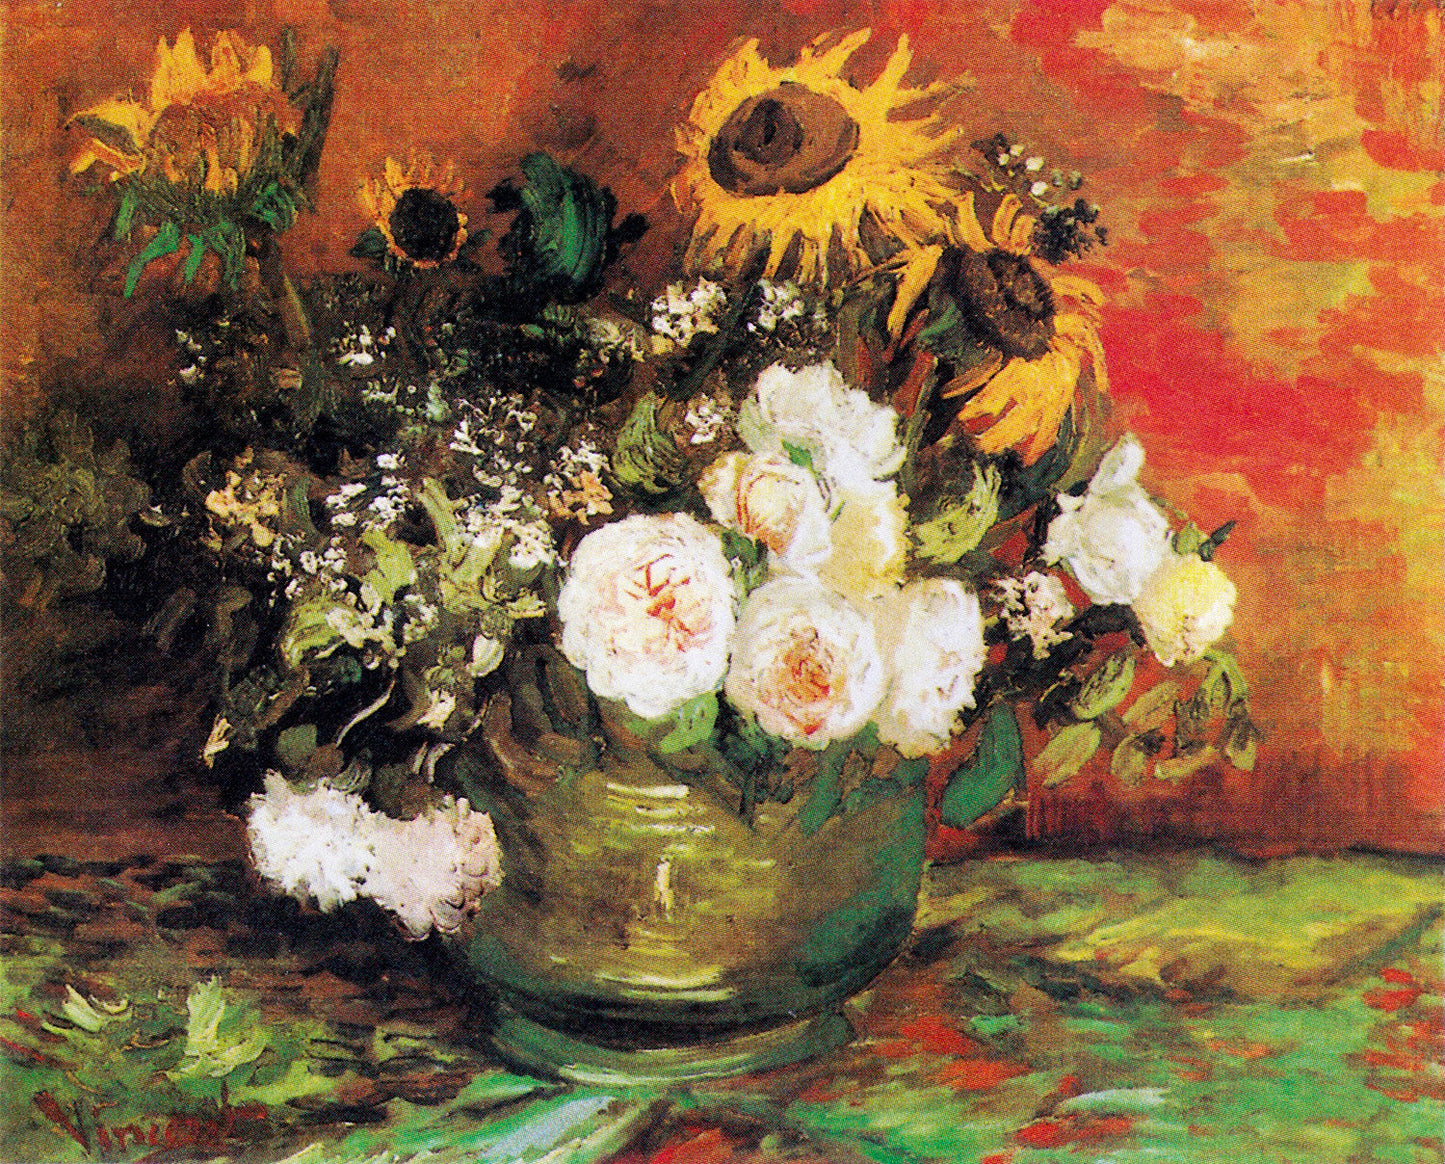 Bowl With Sunflowers Roses And Other Flowers by Vincent van Gogh Art Print